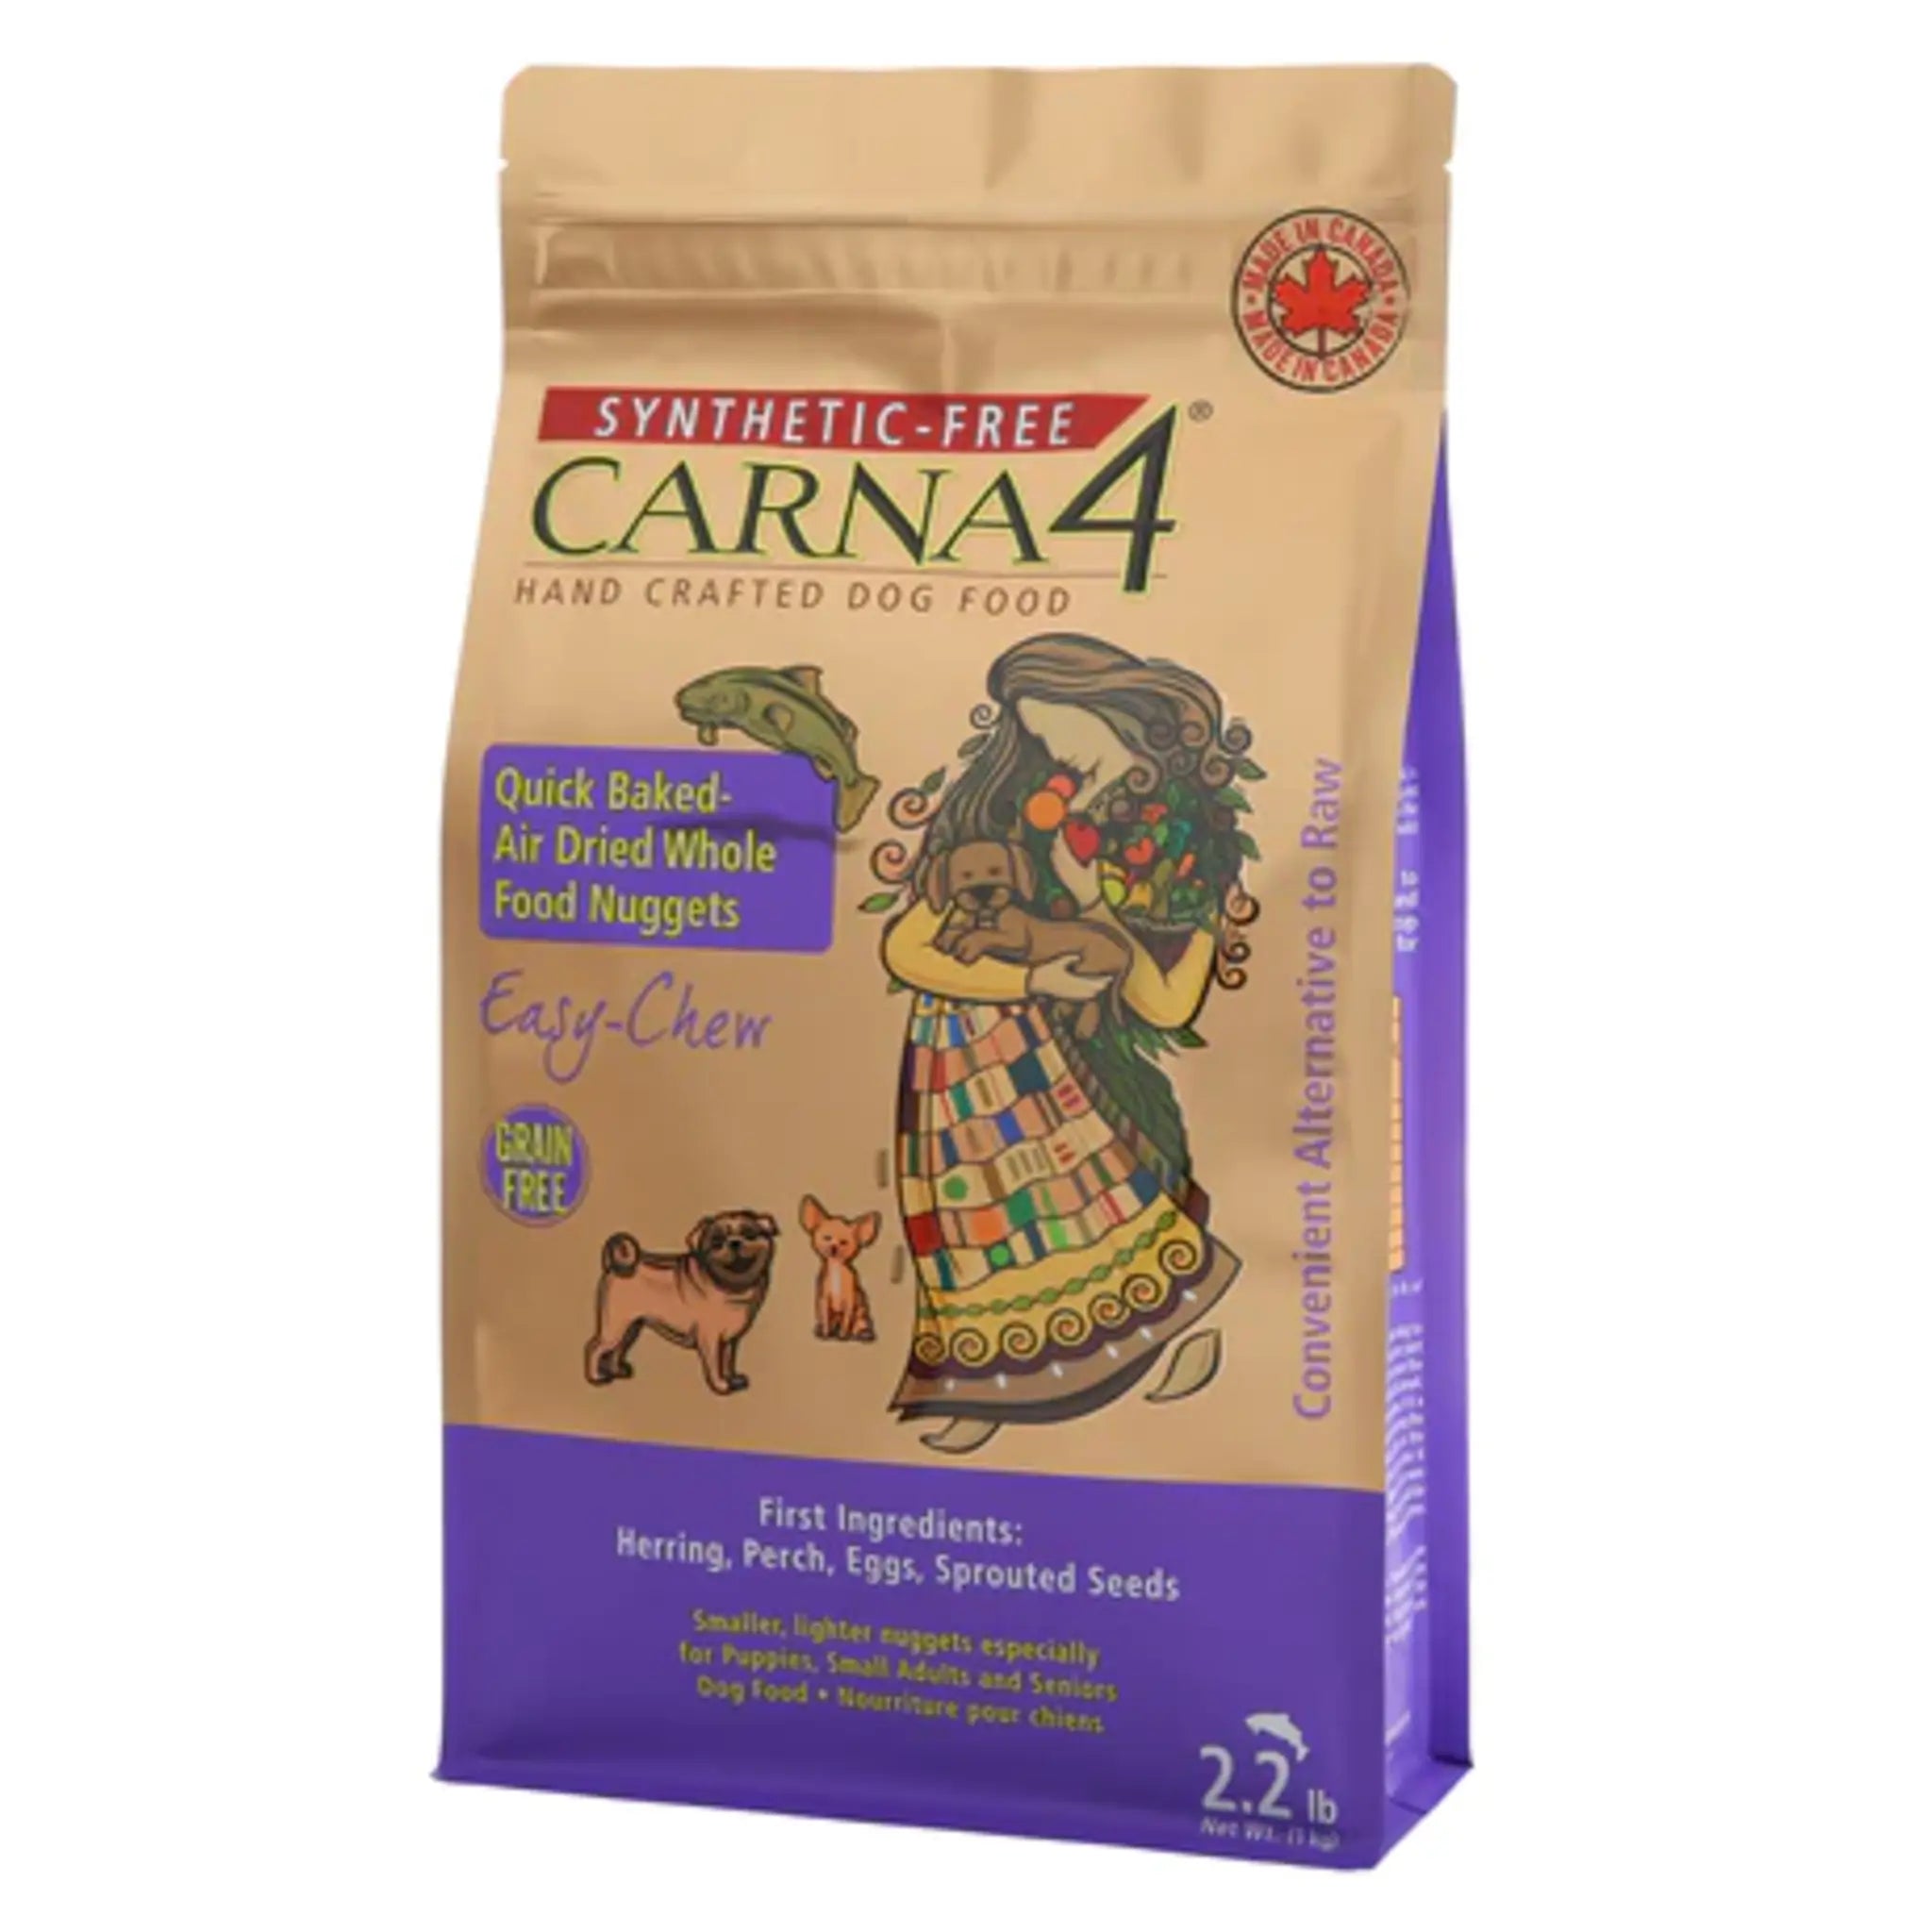 A bag of Carna4 Hand Crafted Dog Food, Easy-Chew Fish Recipe, Synthetic-Free, Made in Canada, 2.2 lb